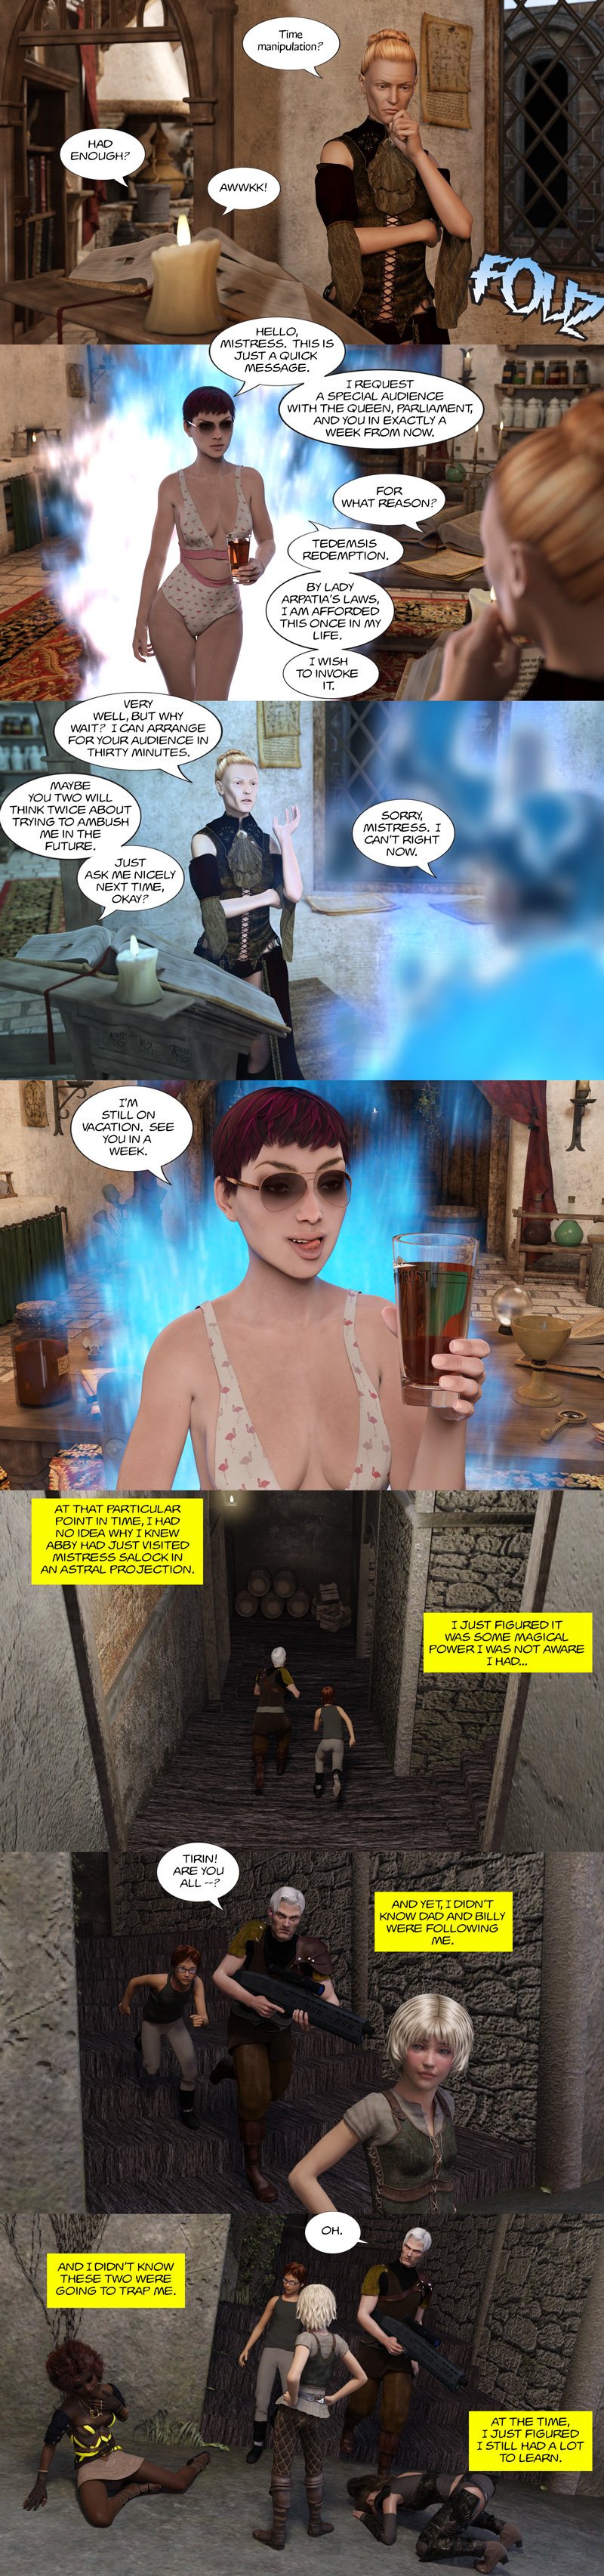 Chapter 16, page 12 – Abby leaves Mistress a voicemail while on vacation